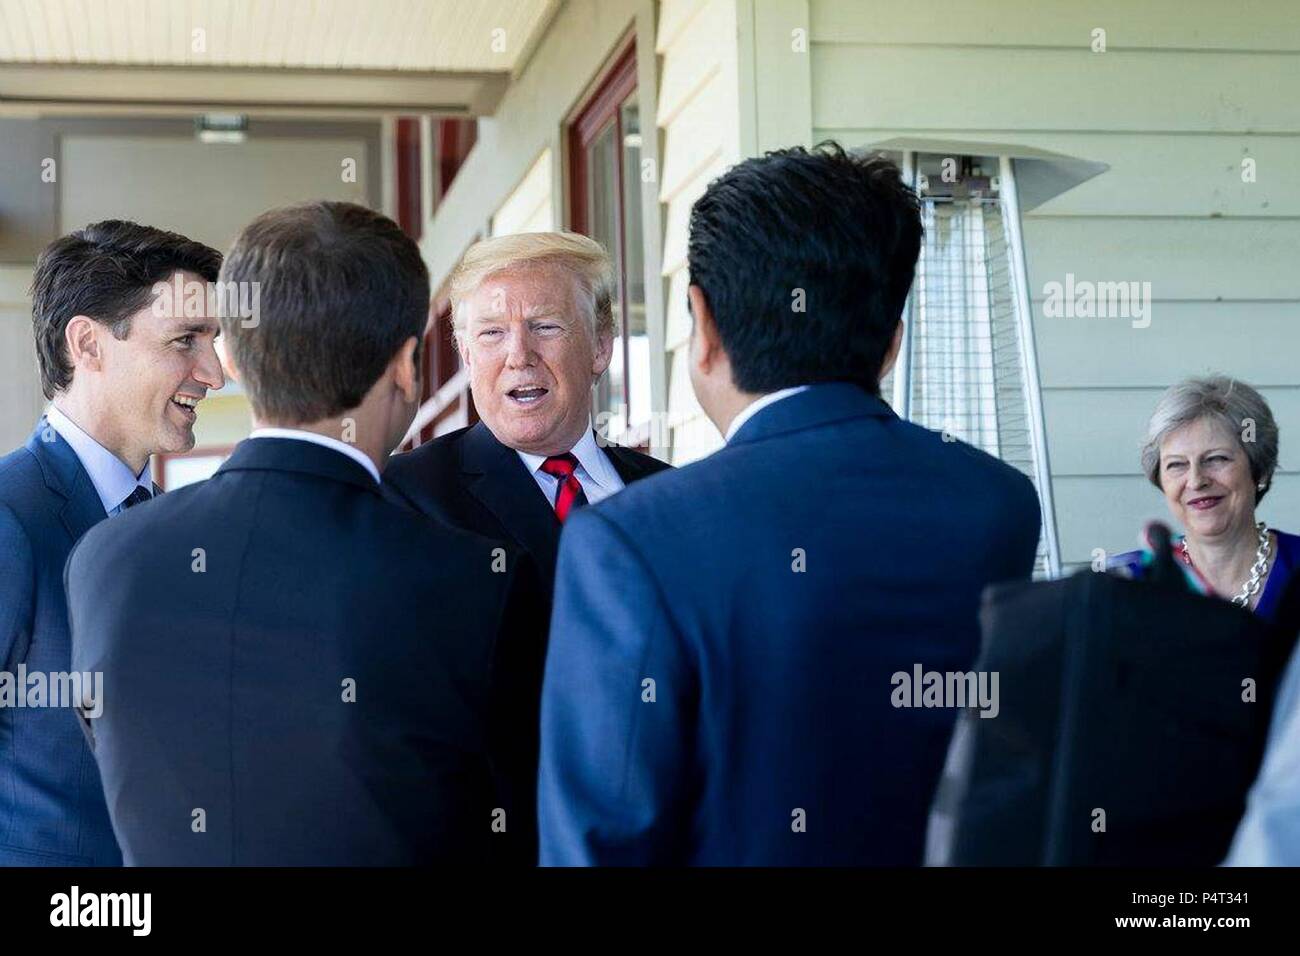 U.S. President Donald Trump, center, chats with Canadian Prime Minister Justin Trudeau, left, French President Emmanuel Macron, Japanese Prime Minister Shinzo Abe and British Prime Minister Theresa May, right, during a working lunch at the G7 Summit June 8, 2018 in Charlevoix, Quebec, Canada. Stock Photo